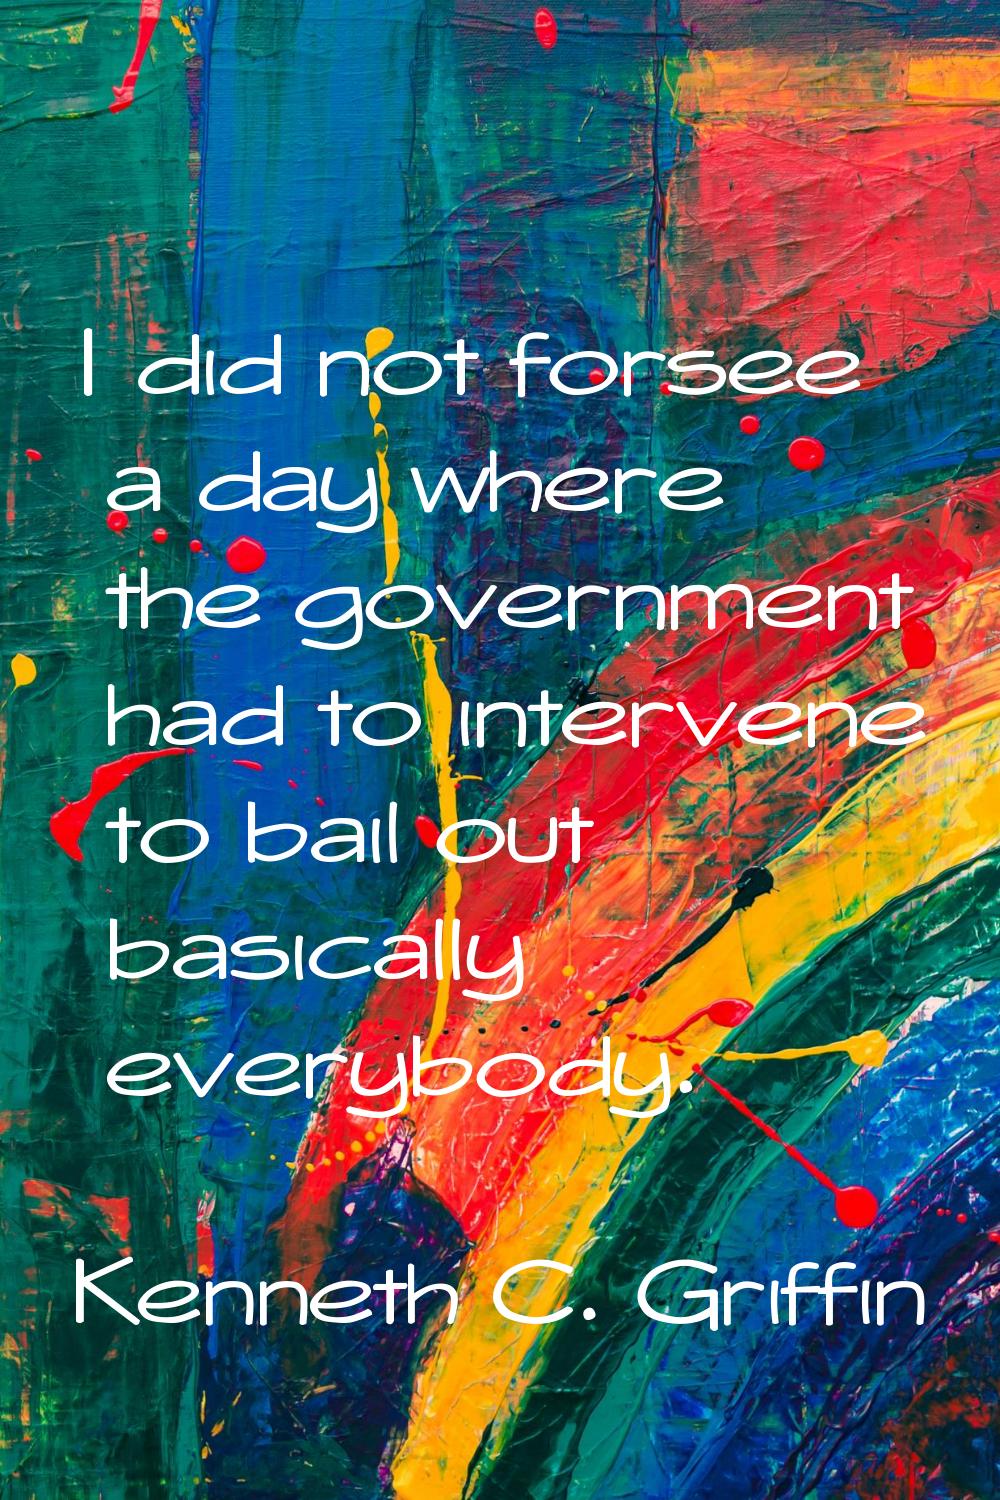 I did not forsee a day where the government had to intervene to bail out basically everybody.